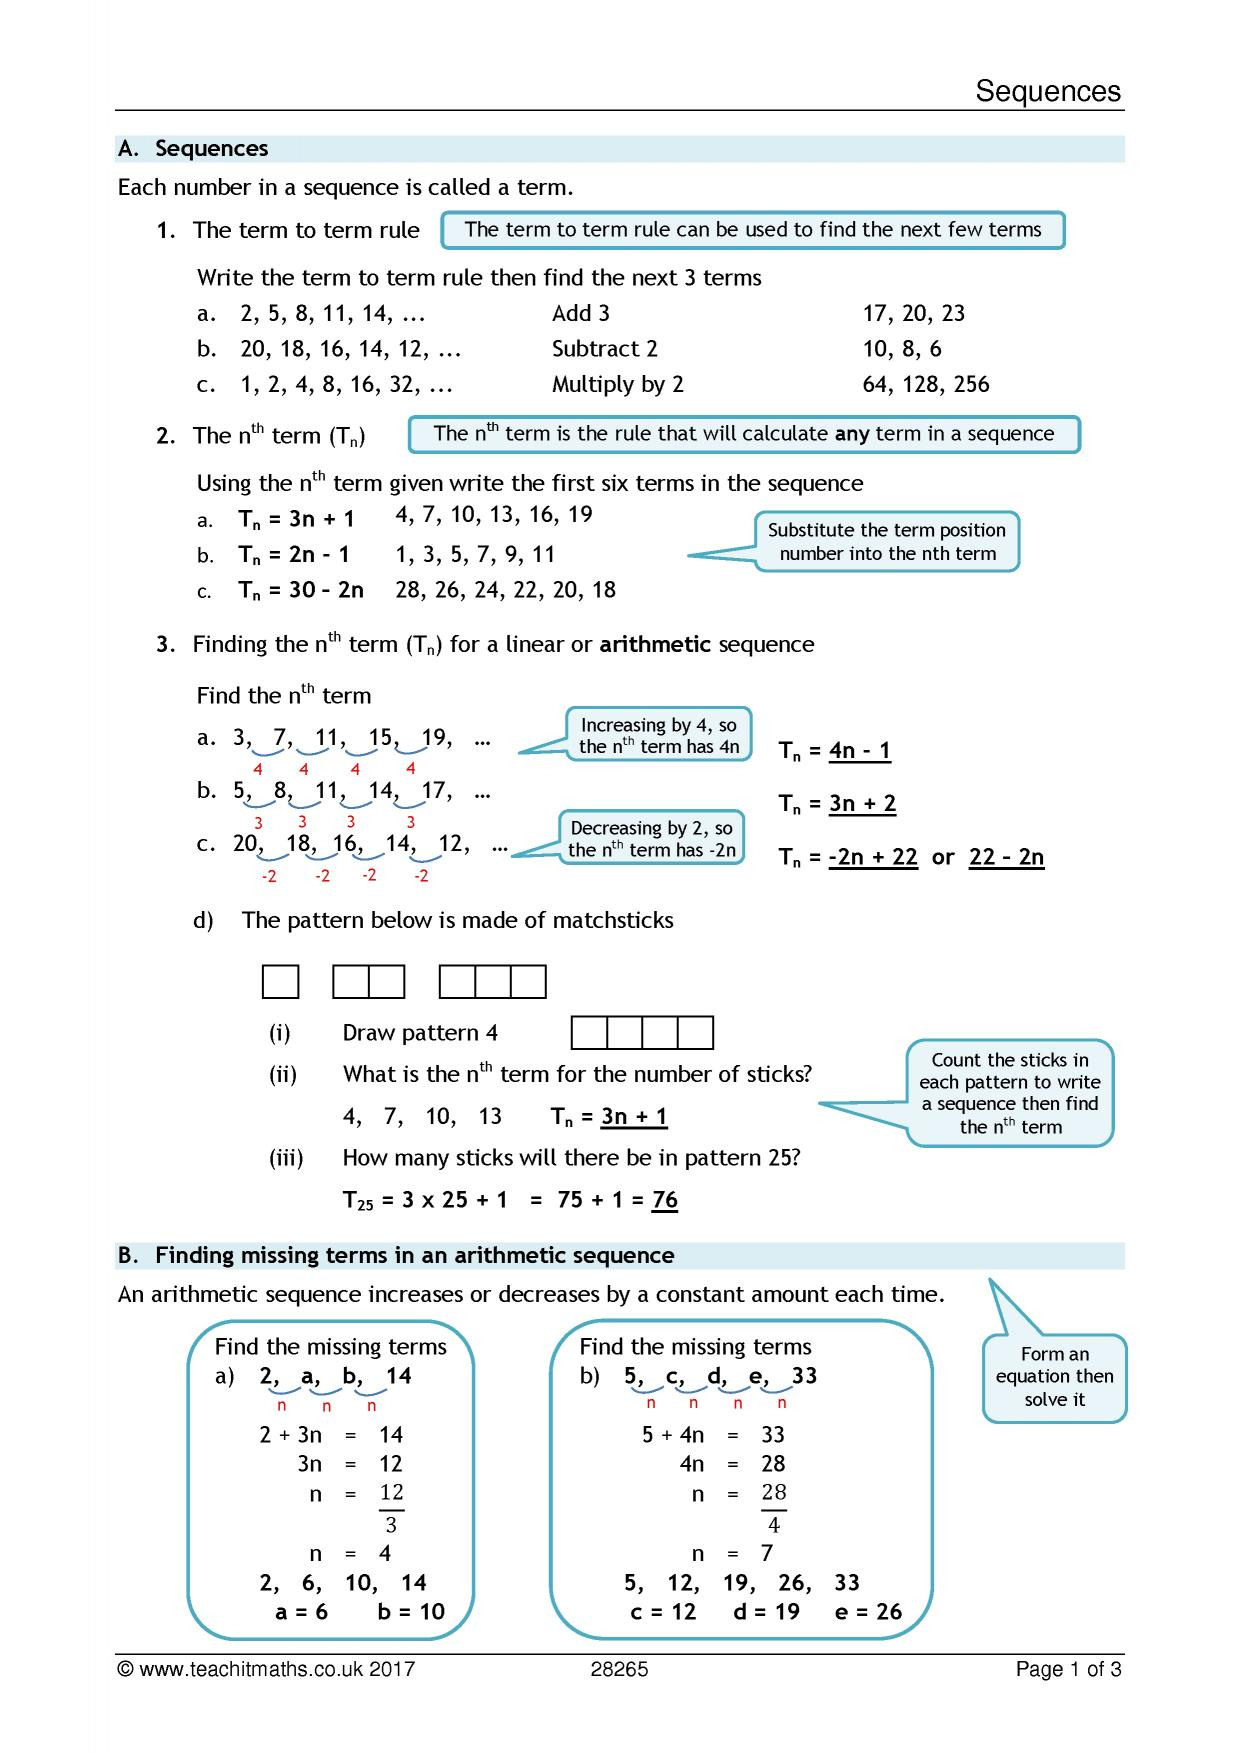 Sequences Review Sheet